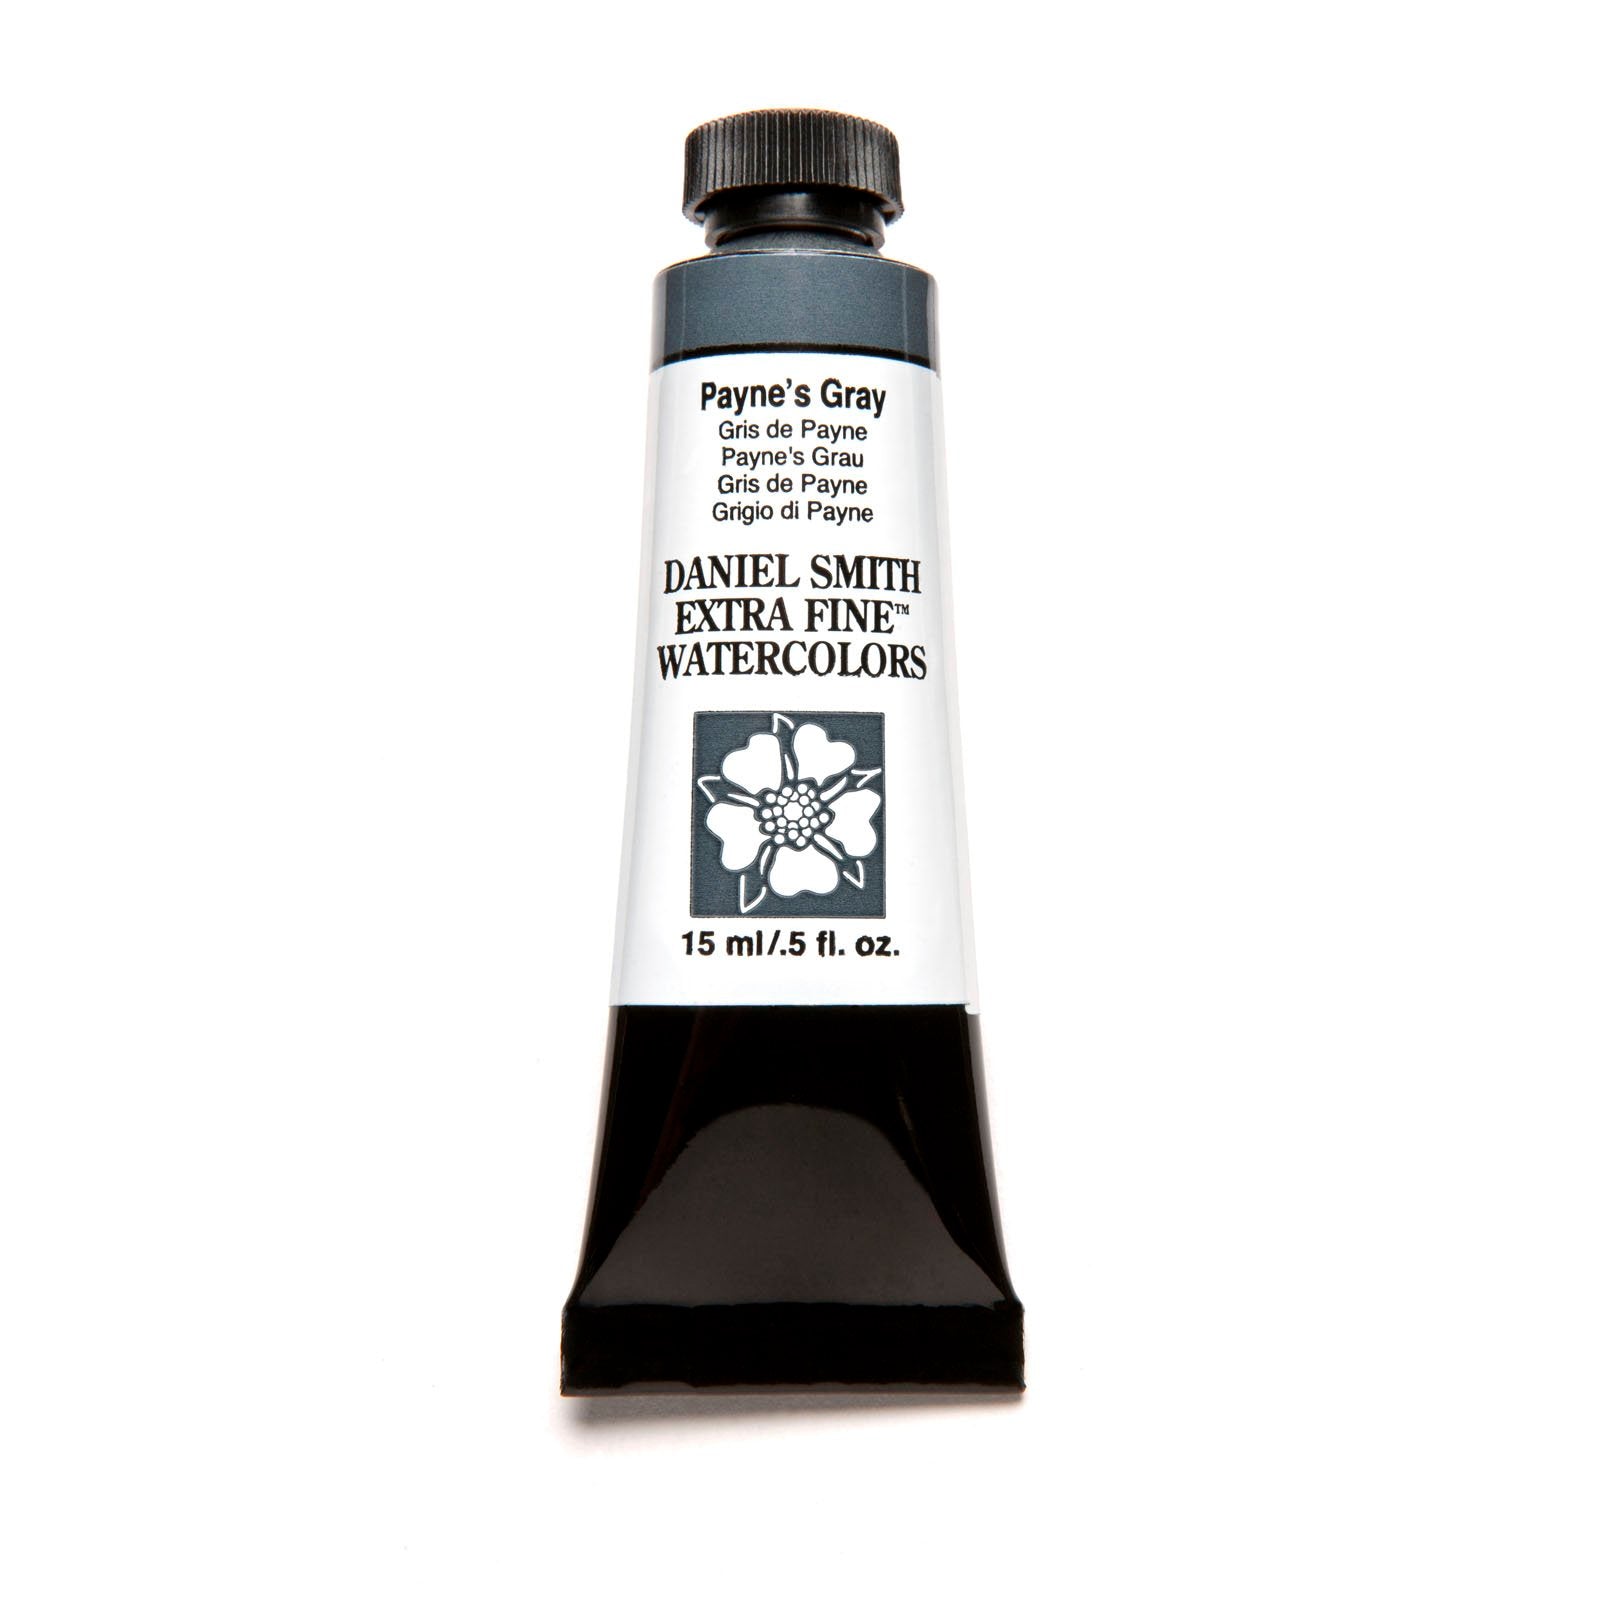 Extra Fine Watercolor 15ml Paynes Gray